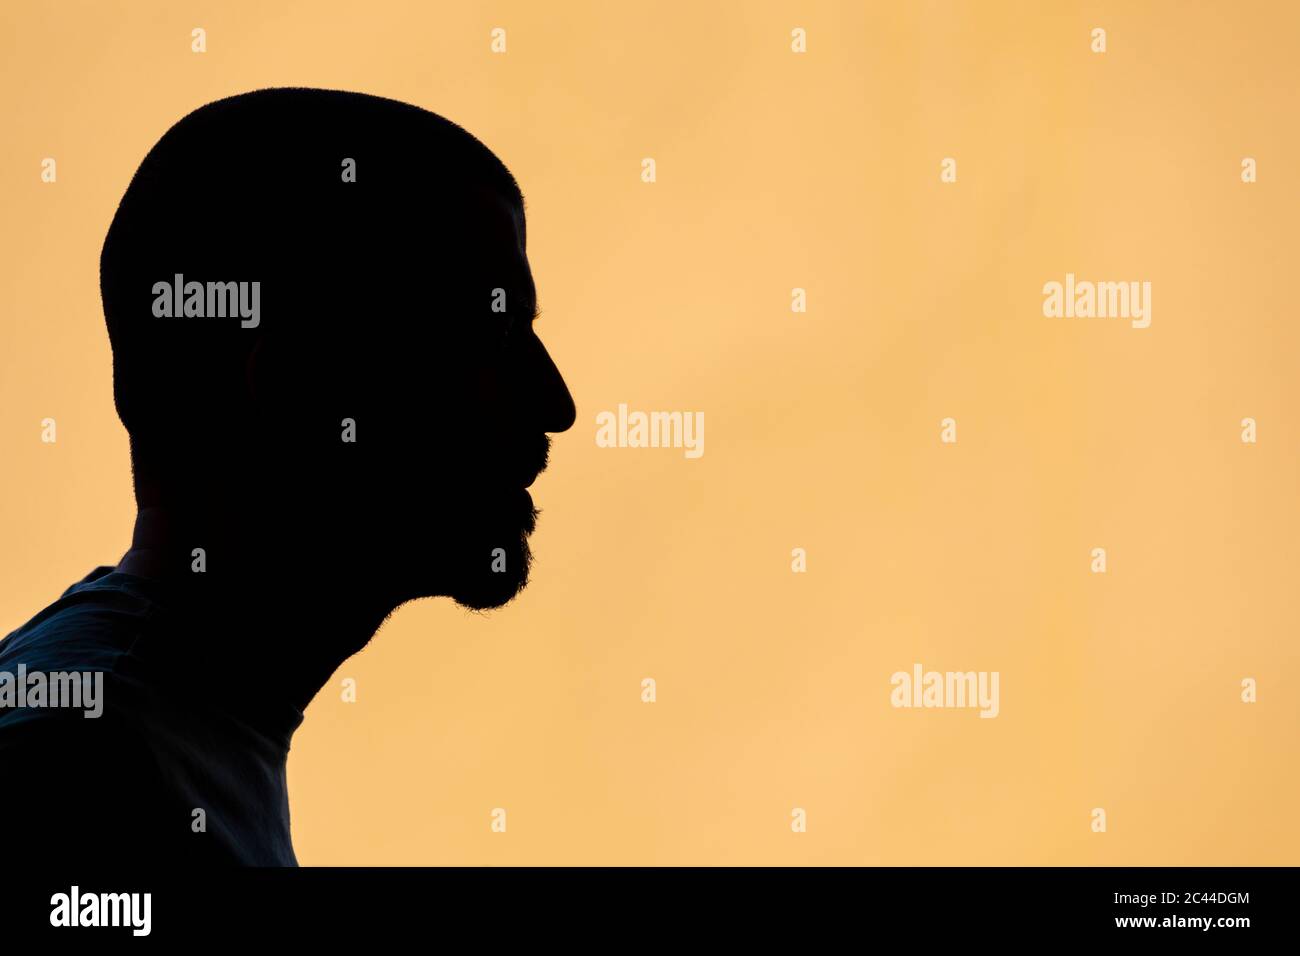 Silhouette of man against yellow background Stock Photo